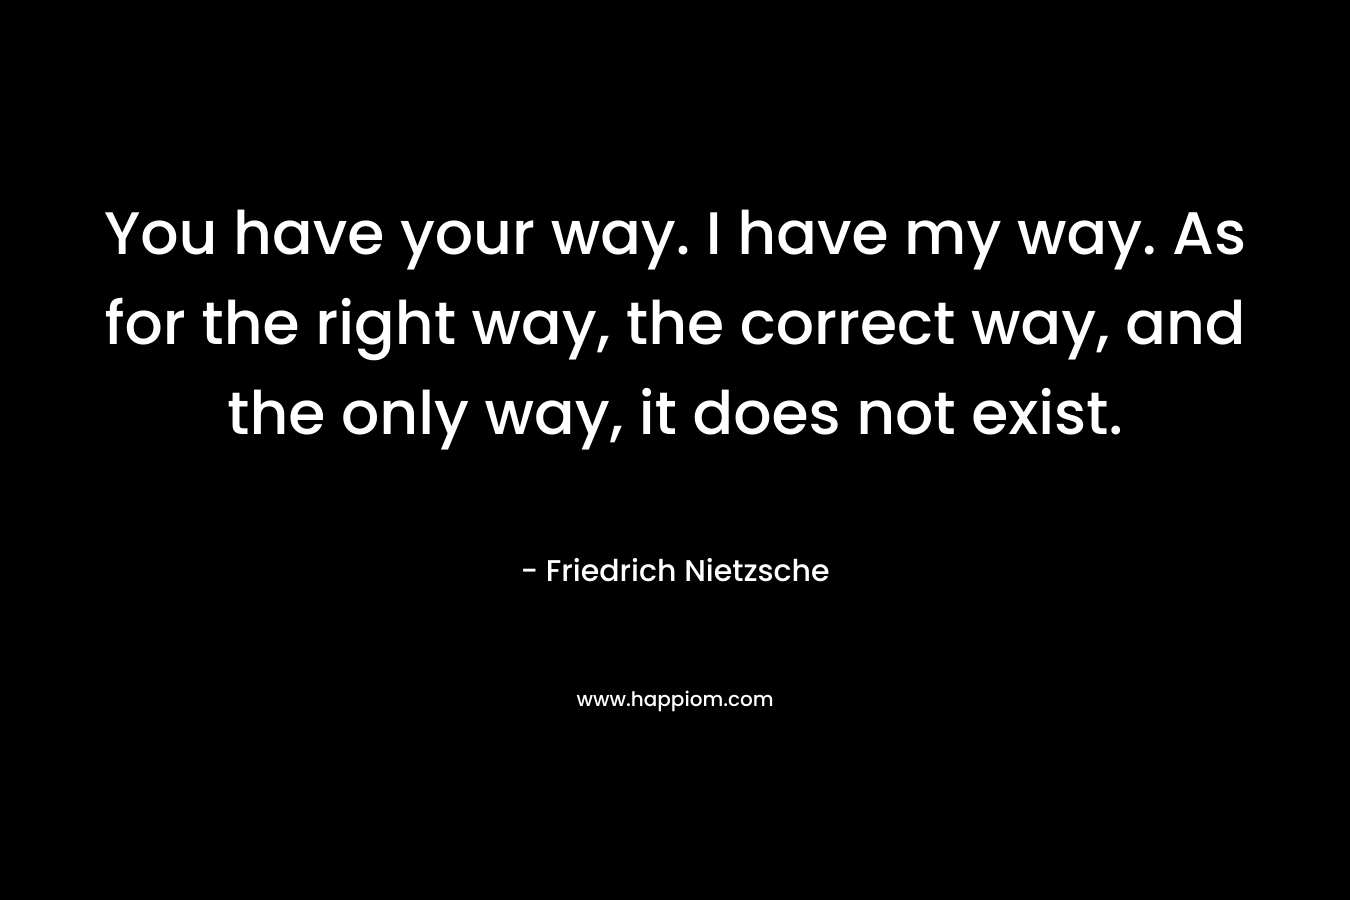 You have your way. I have my way. As for the right way, the correct way, and the only way, it does not exist. – Friedrich Nietzsche